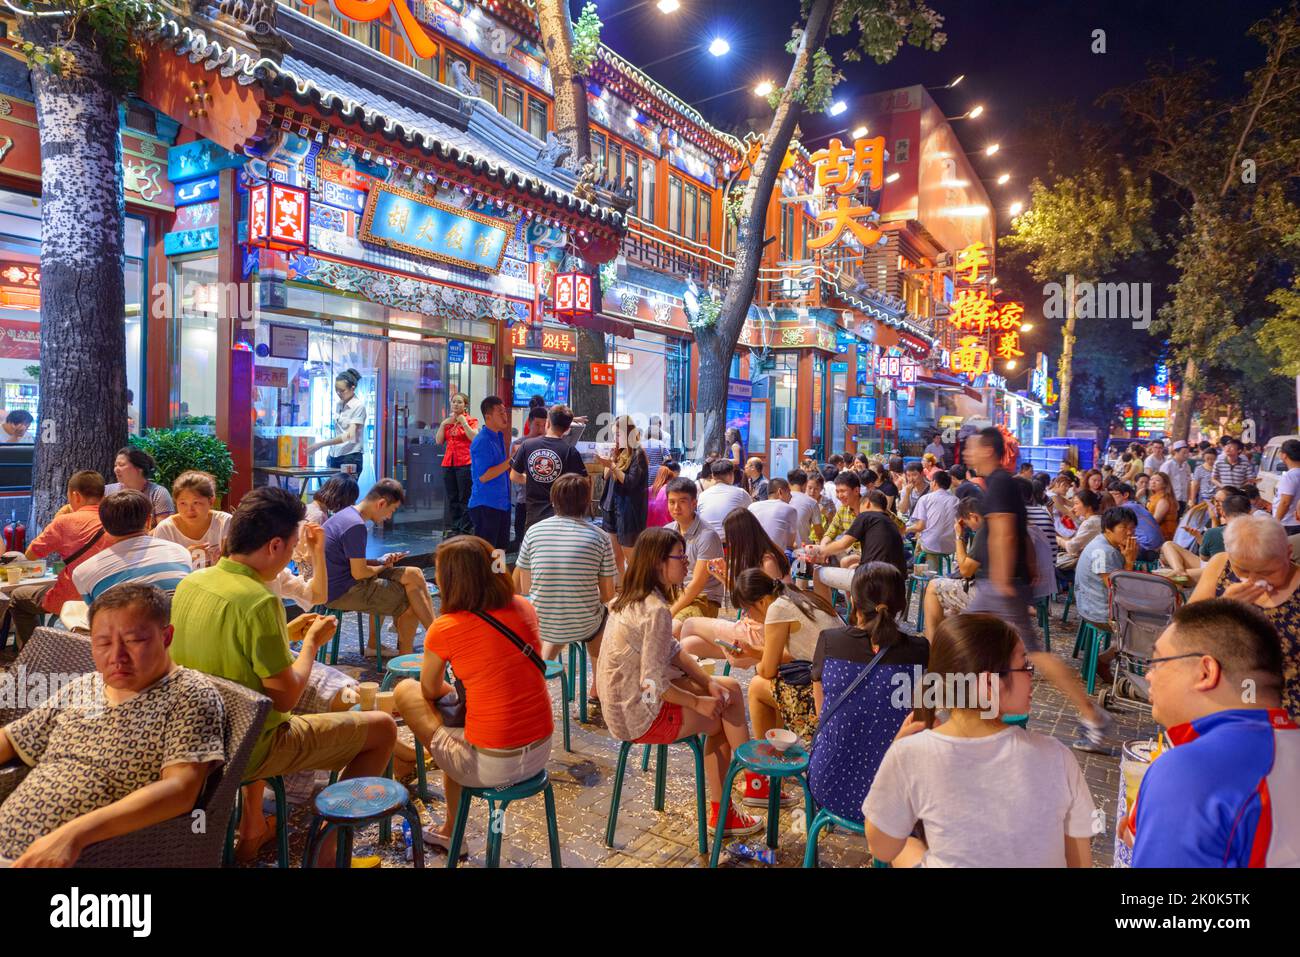 BEIJING, CHINA - JUNE 28, 2014: Guijie Street, known as 'Ghost Street' with nightlife crowds. Stock Photo